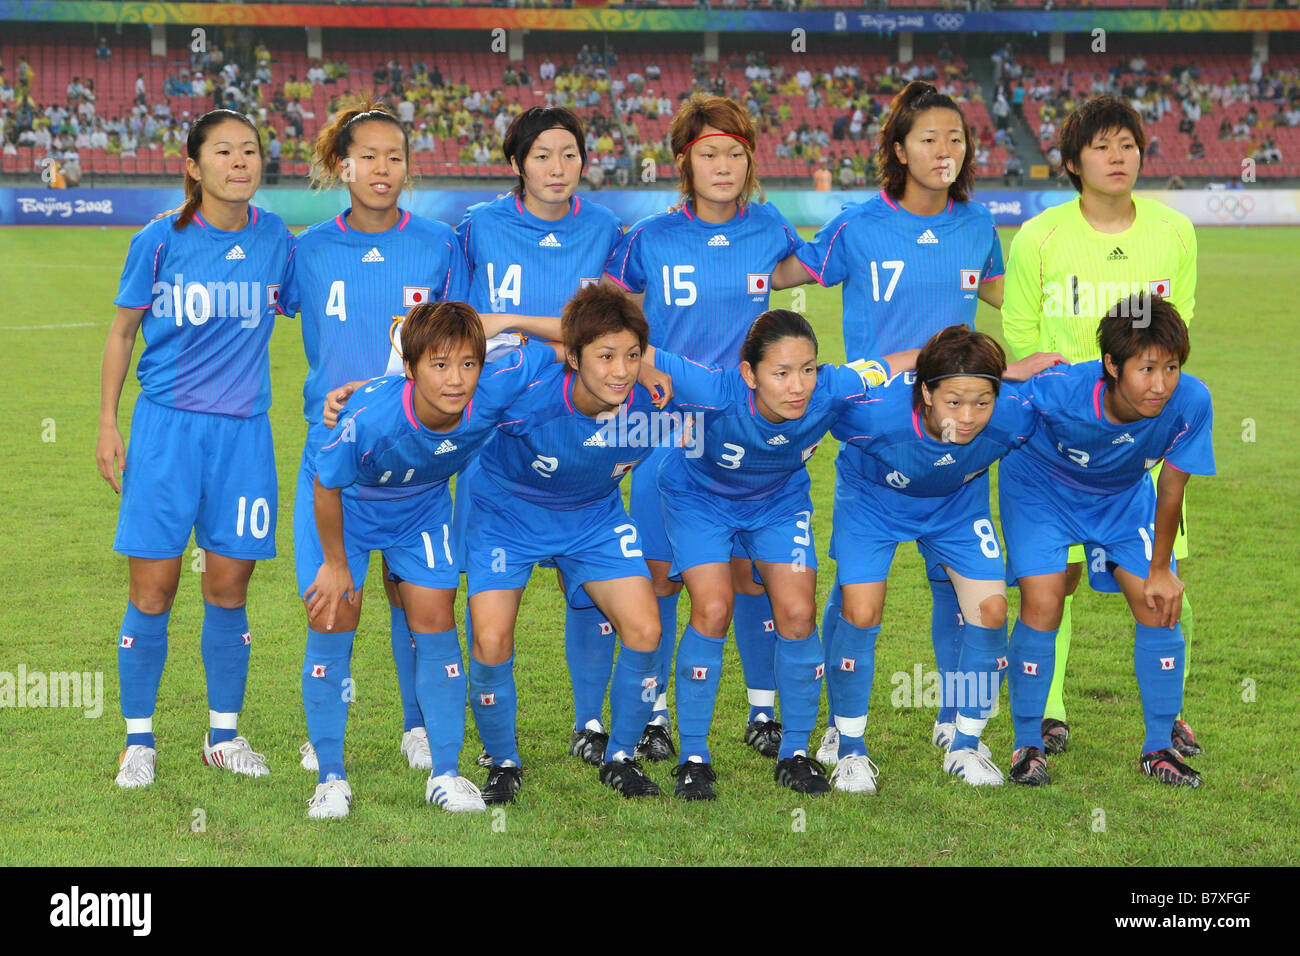 Japan Womens team group line up JPN AUGUST 21 2008 Football Beijing 2008 Olympic Games Womens Football Bronze medal match between Japan and Germany at the Workers Stadium in Beijing China Photo by Daiju Kitamura AFLO SPORT 1045 Stock Photo